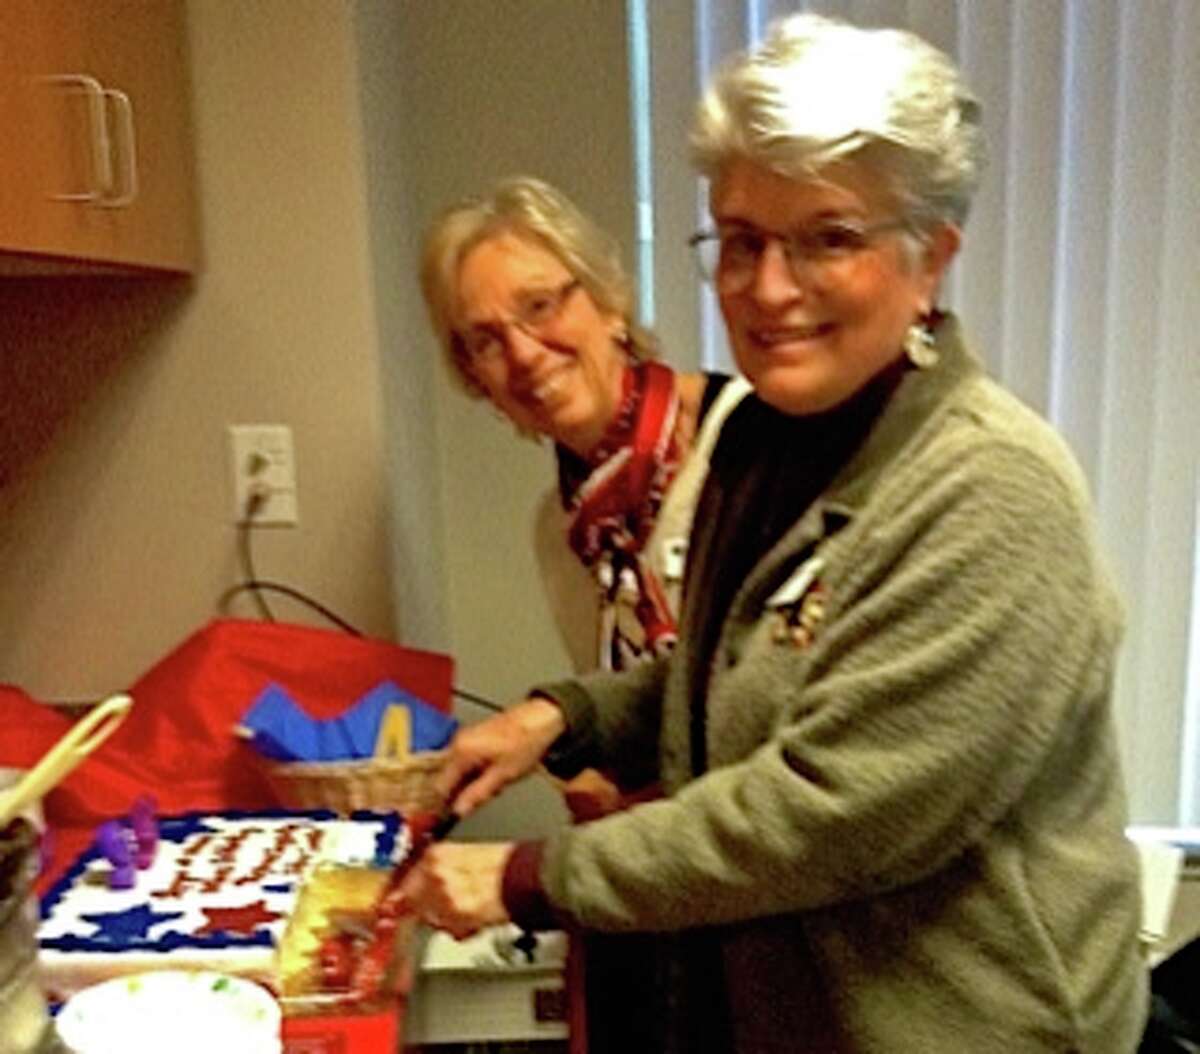 Manistee League of Women Voters president, Nancy Behring and treasurer Laurie Mason serve up the 95th anniversary cake to league members on Thursday. (Courtesy photo)